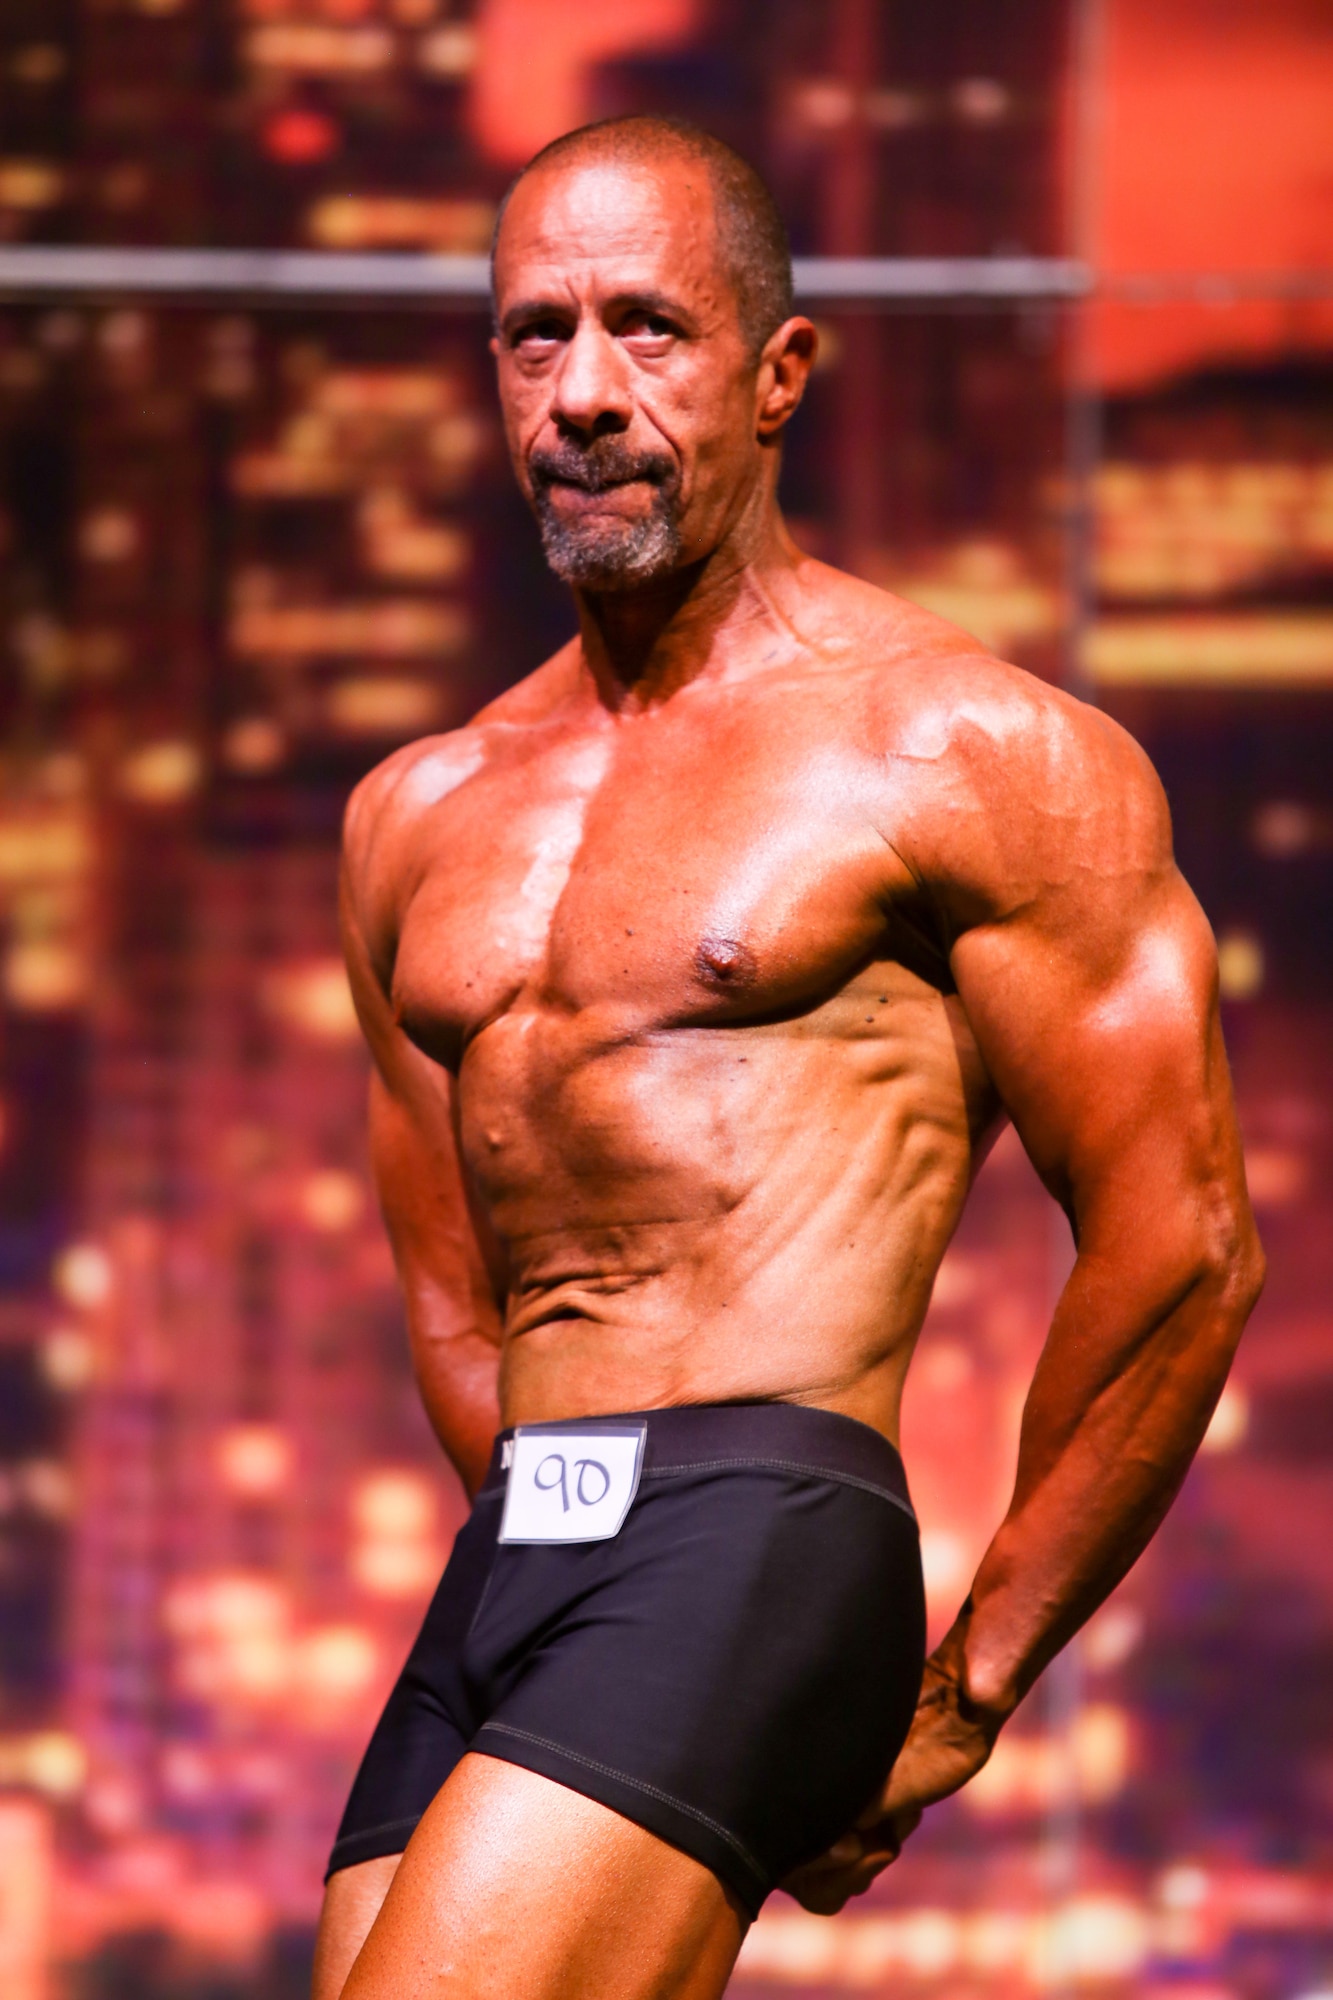 Richard Gonzales, 225th Air Defense Group personnel specialist, wins first place in the Classic Men’s Physique Masters 50 & Older class at the Washington State Championship for bodybuilding at the Auburn Performing Arts Center in Auburn, Aug. 4, 2018. (Courtesy Photo by Richard Gonzales)